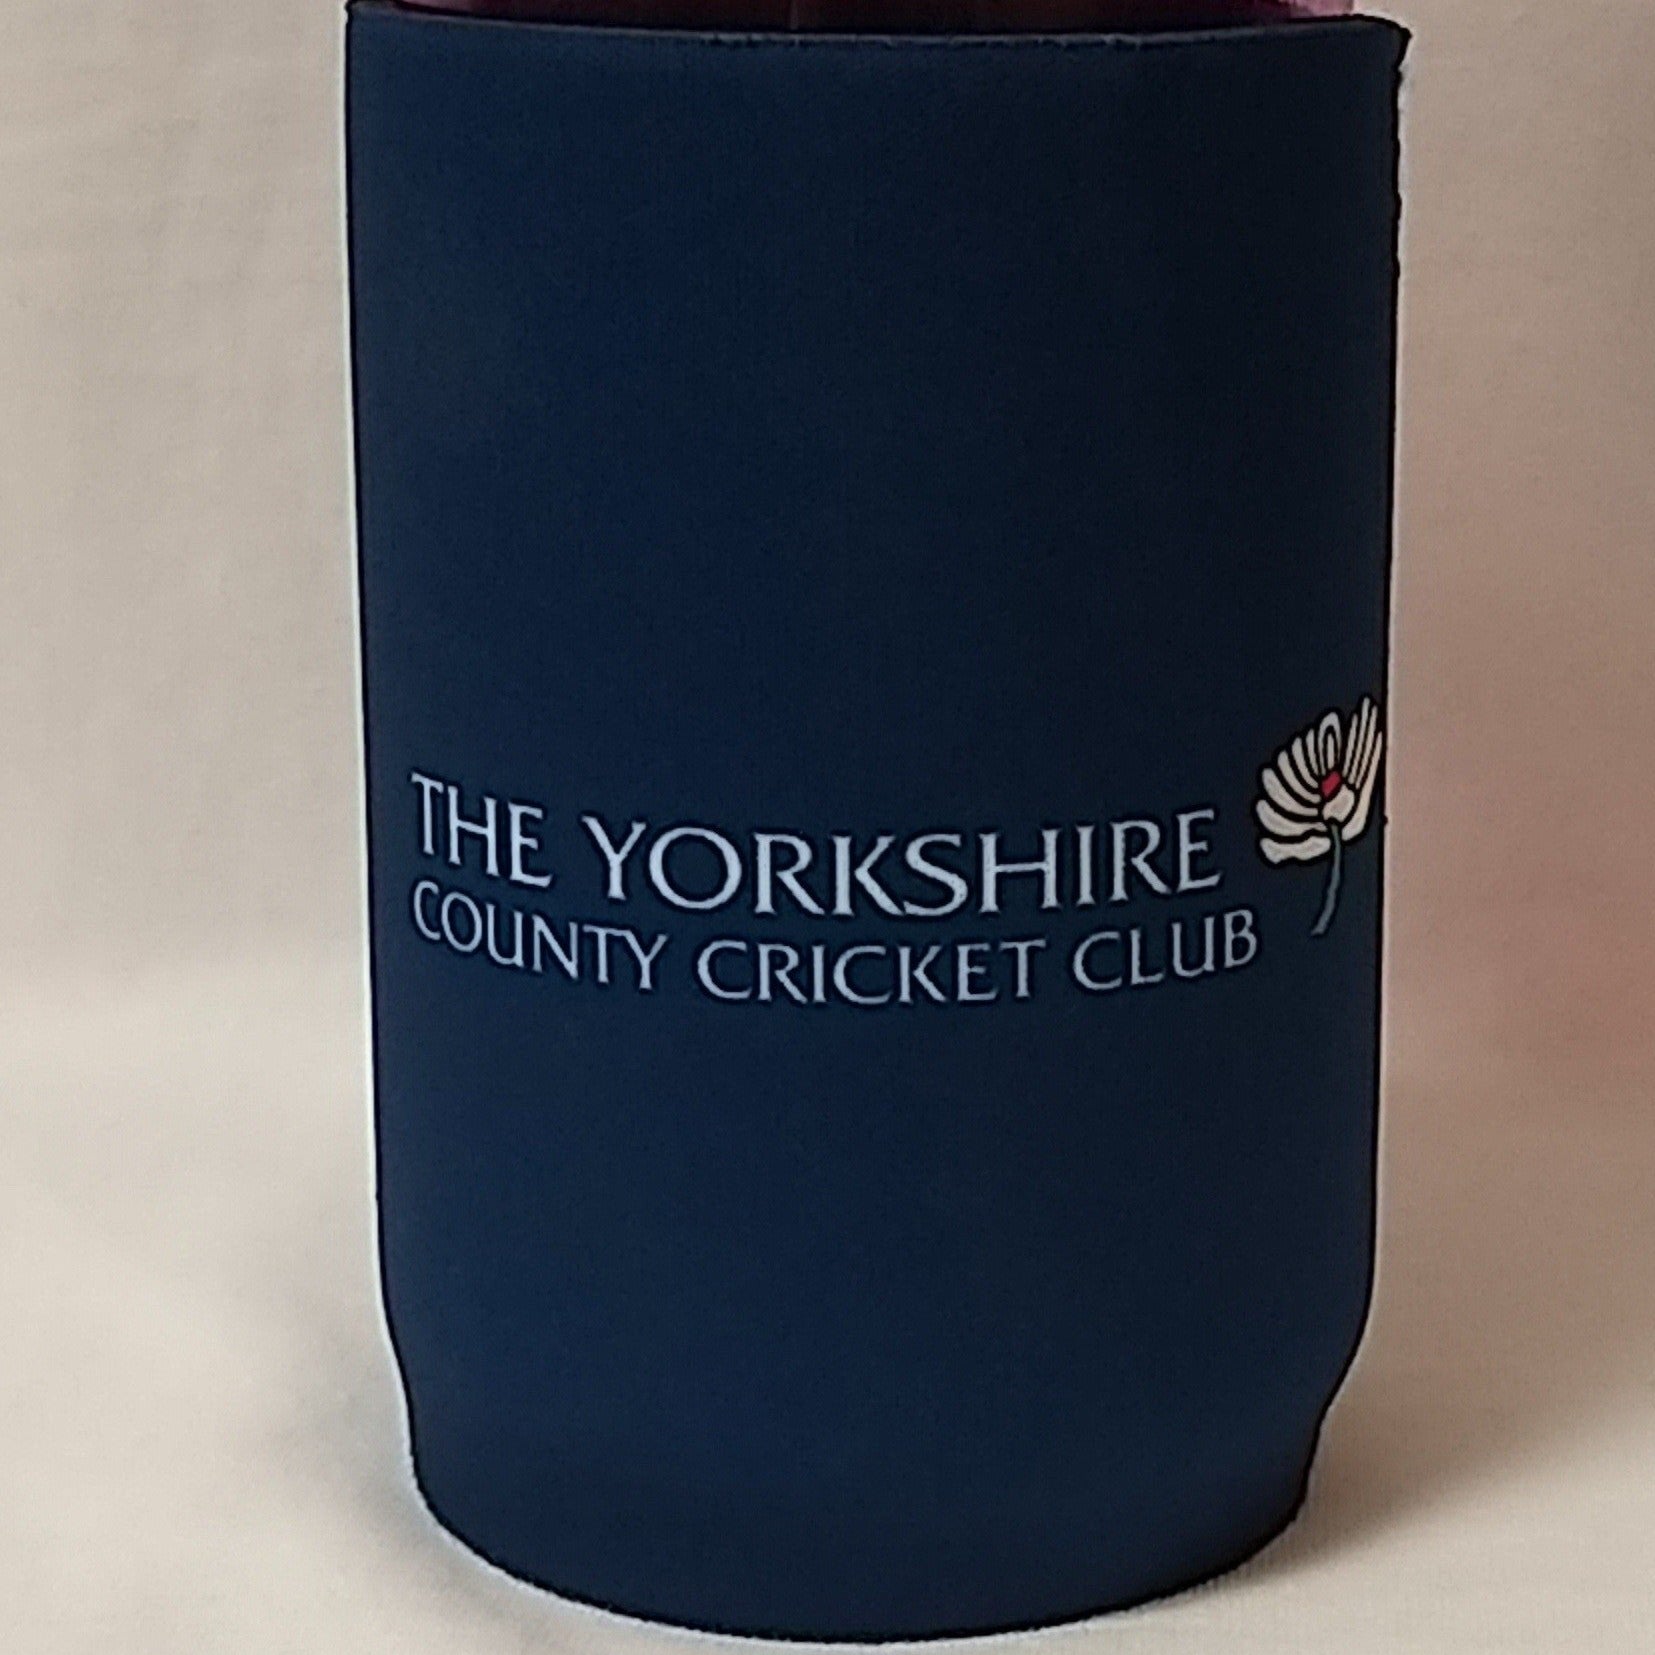 YCCC stubby cooler holder